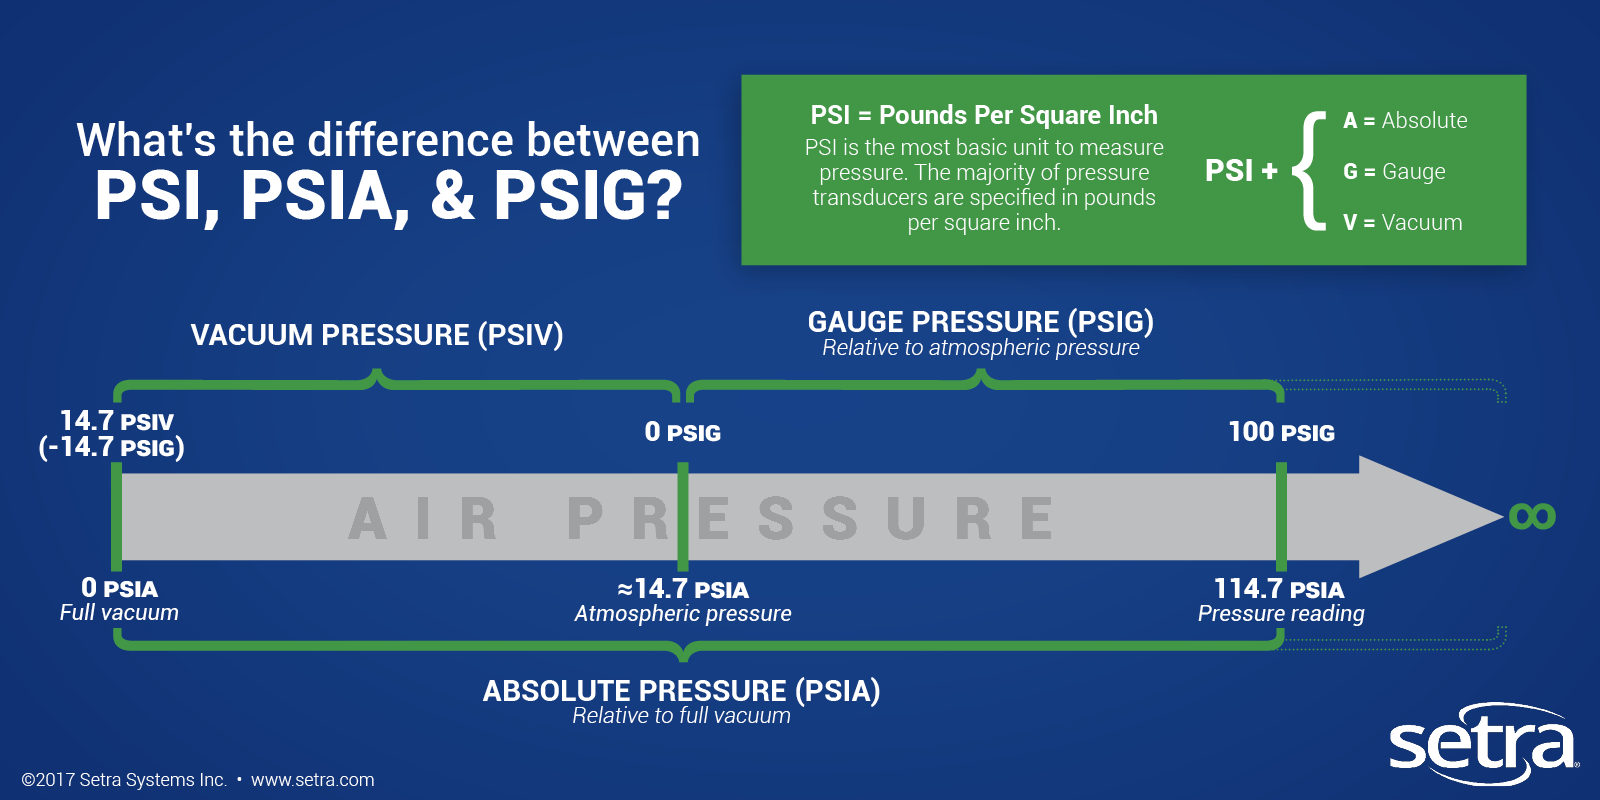 What is absolute pressure?